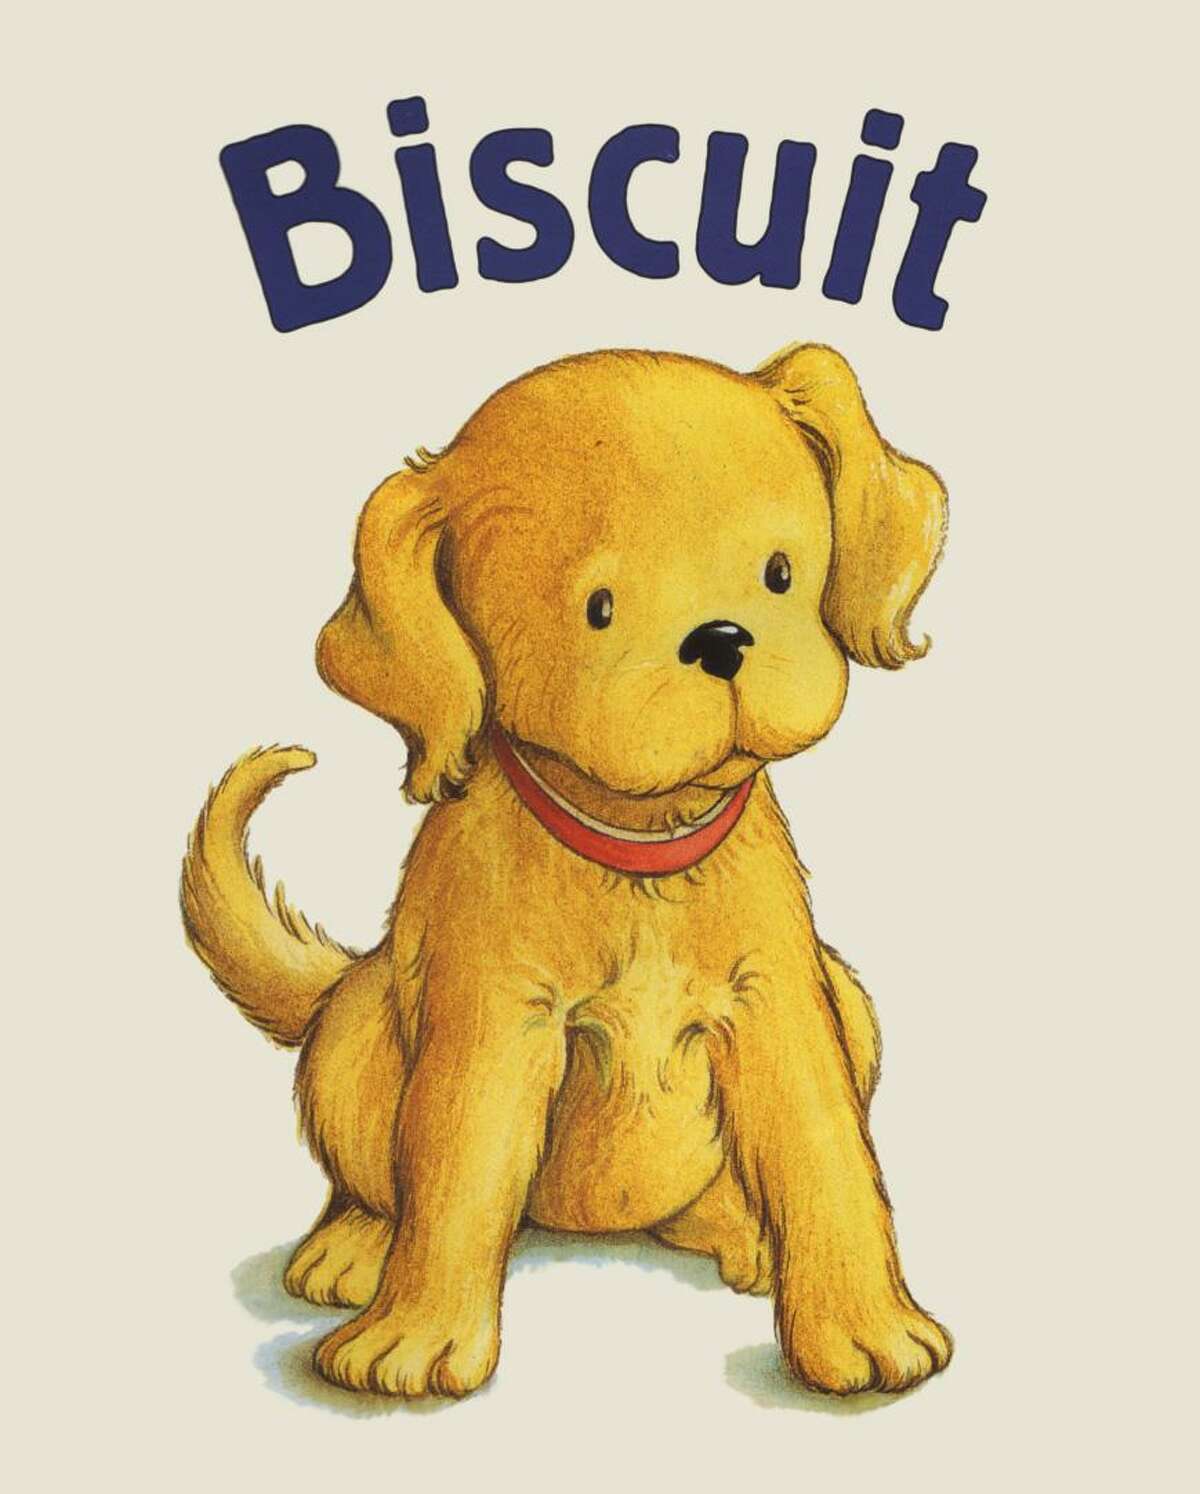 biscuit book dog